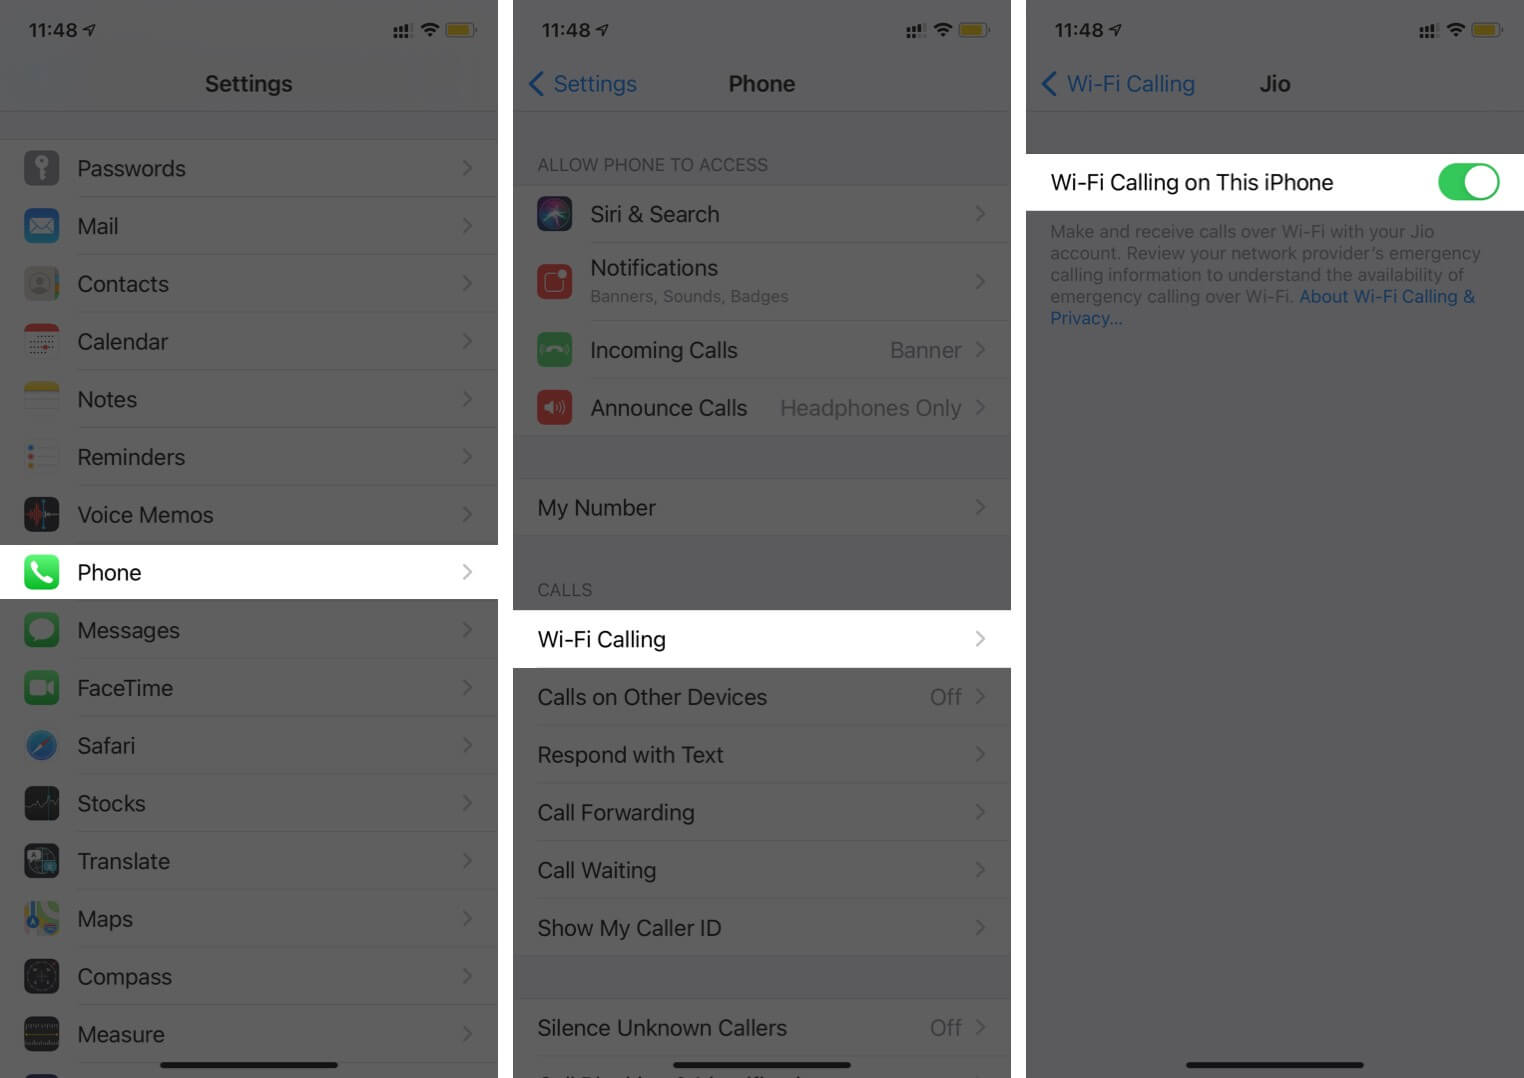 Tap on Phone in Settings and tap Wi-Fi Calling to enable Wi-Fi Calling For Other Devices